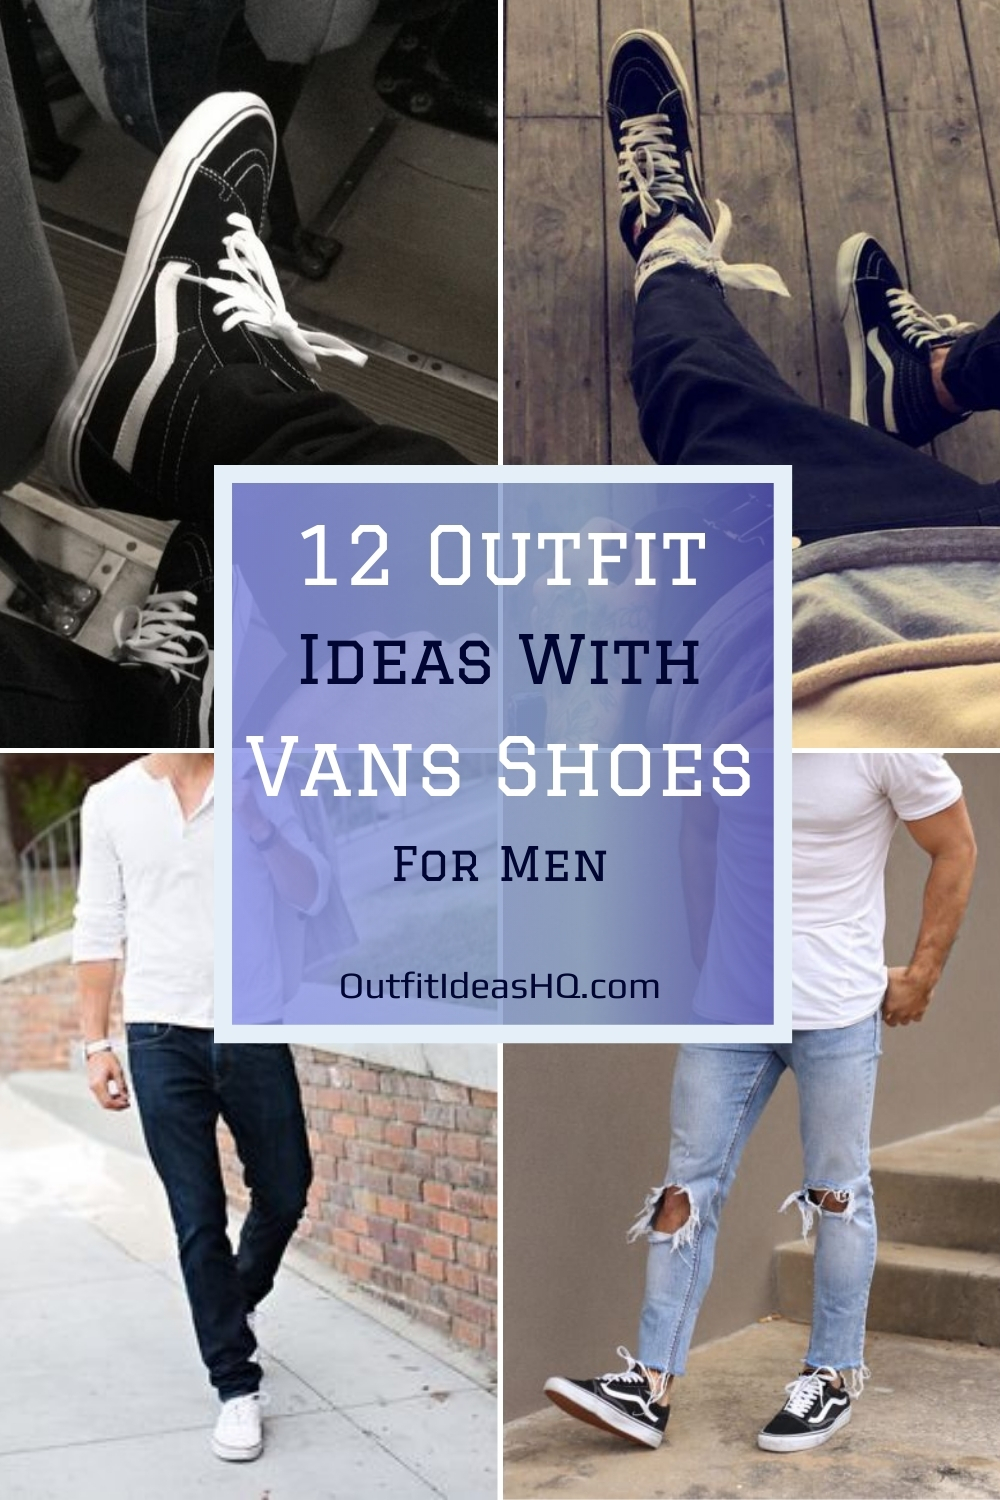 12 Mens Vans Shoe Outfits to Wear for Inspiration - Outfit Ideas HQ